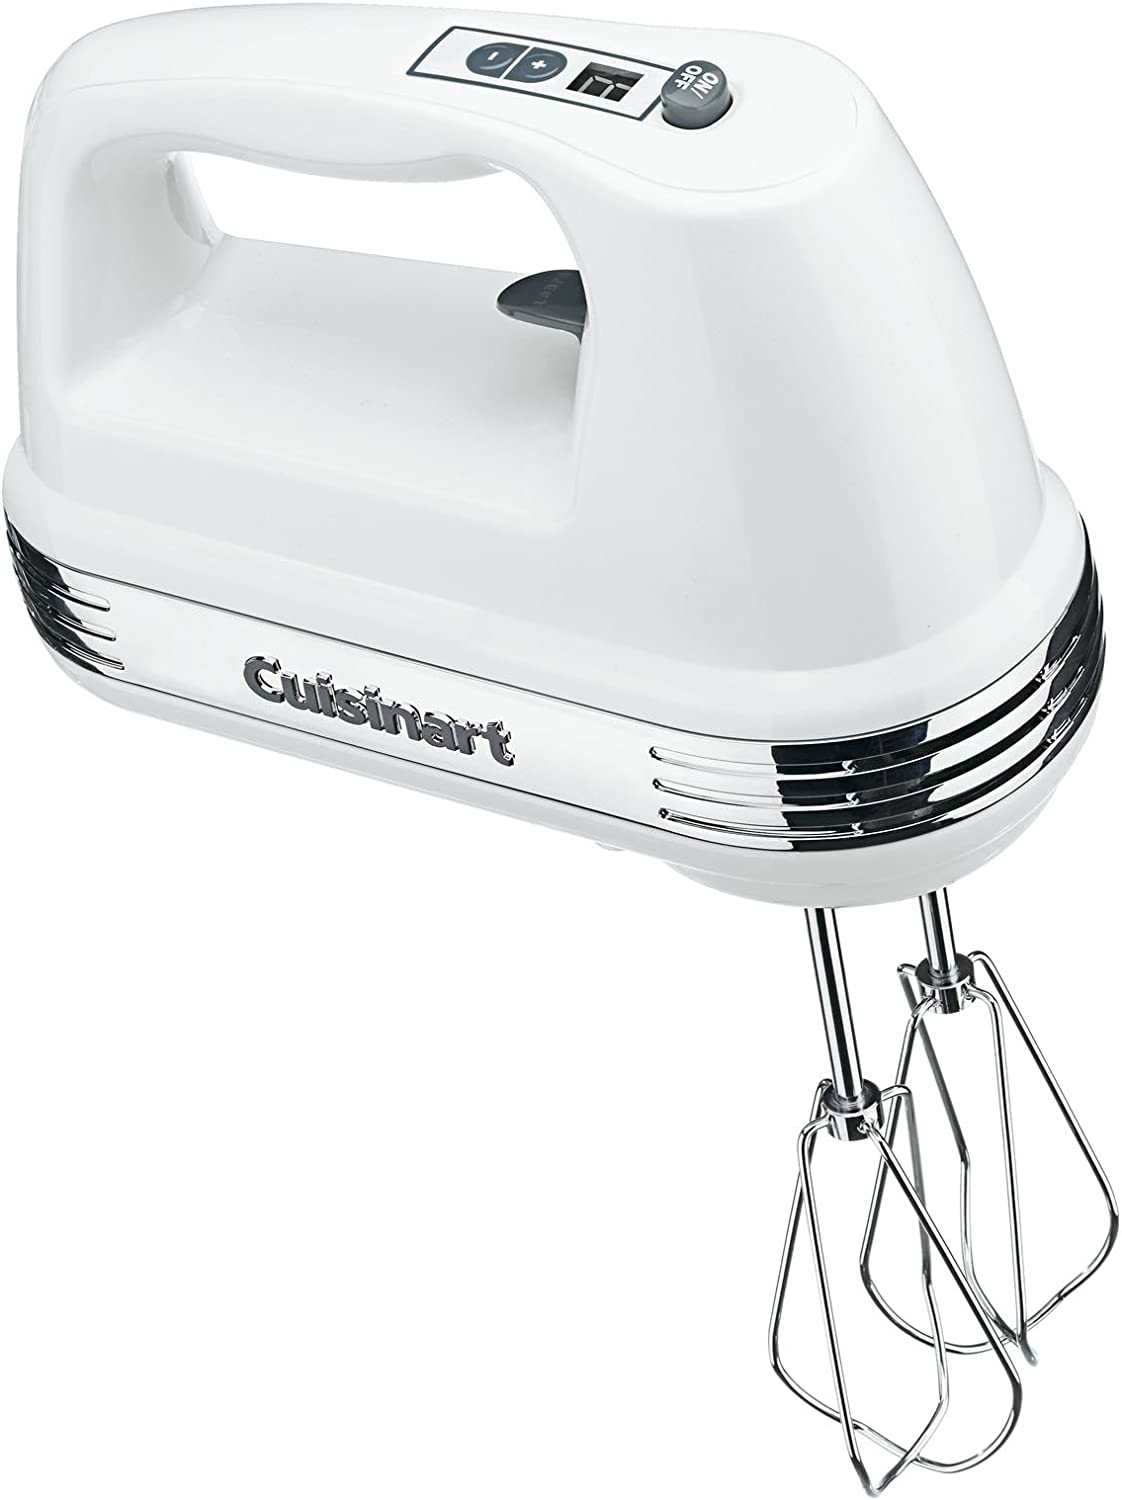 Cuisinart HM-90SFR POWER 9 Speed Hand Mixer with Case - Certified Refurbished